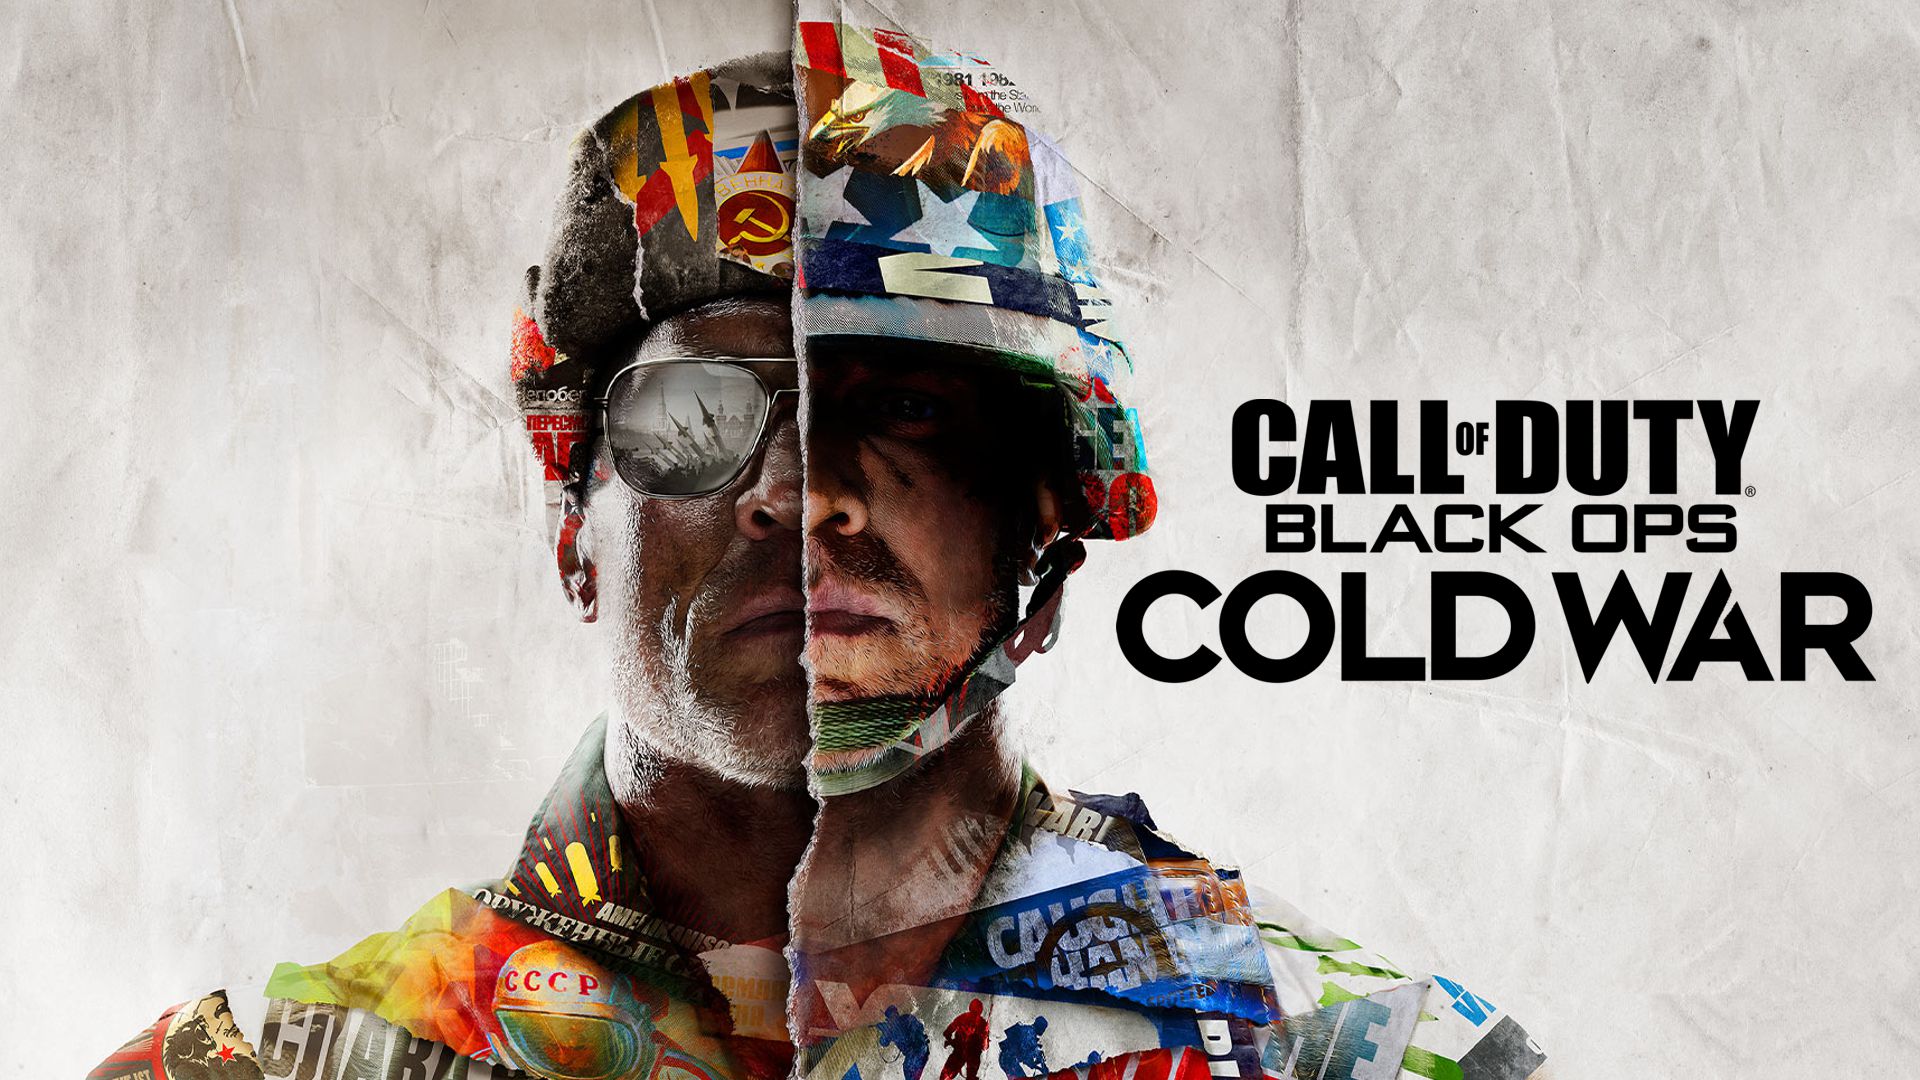 call of duty black ops cold war playstation